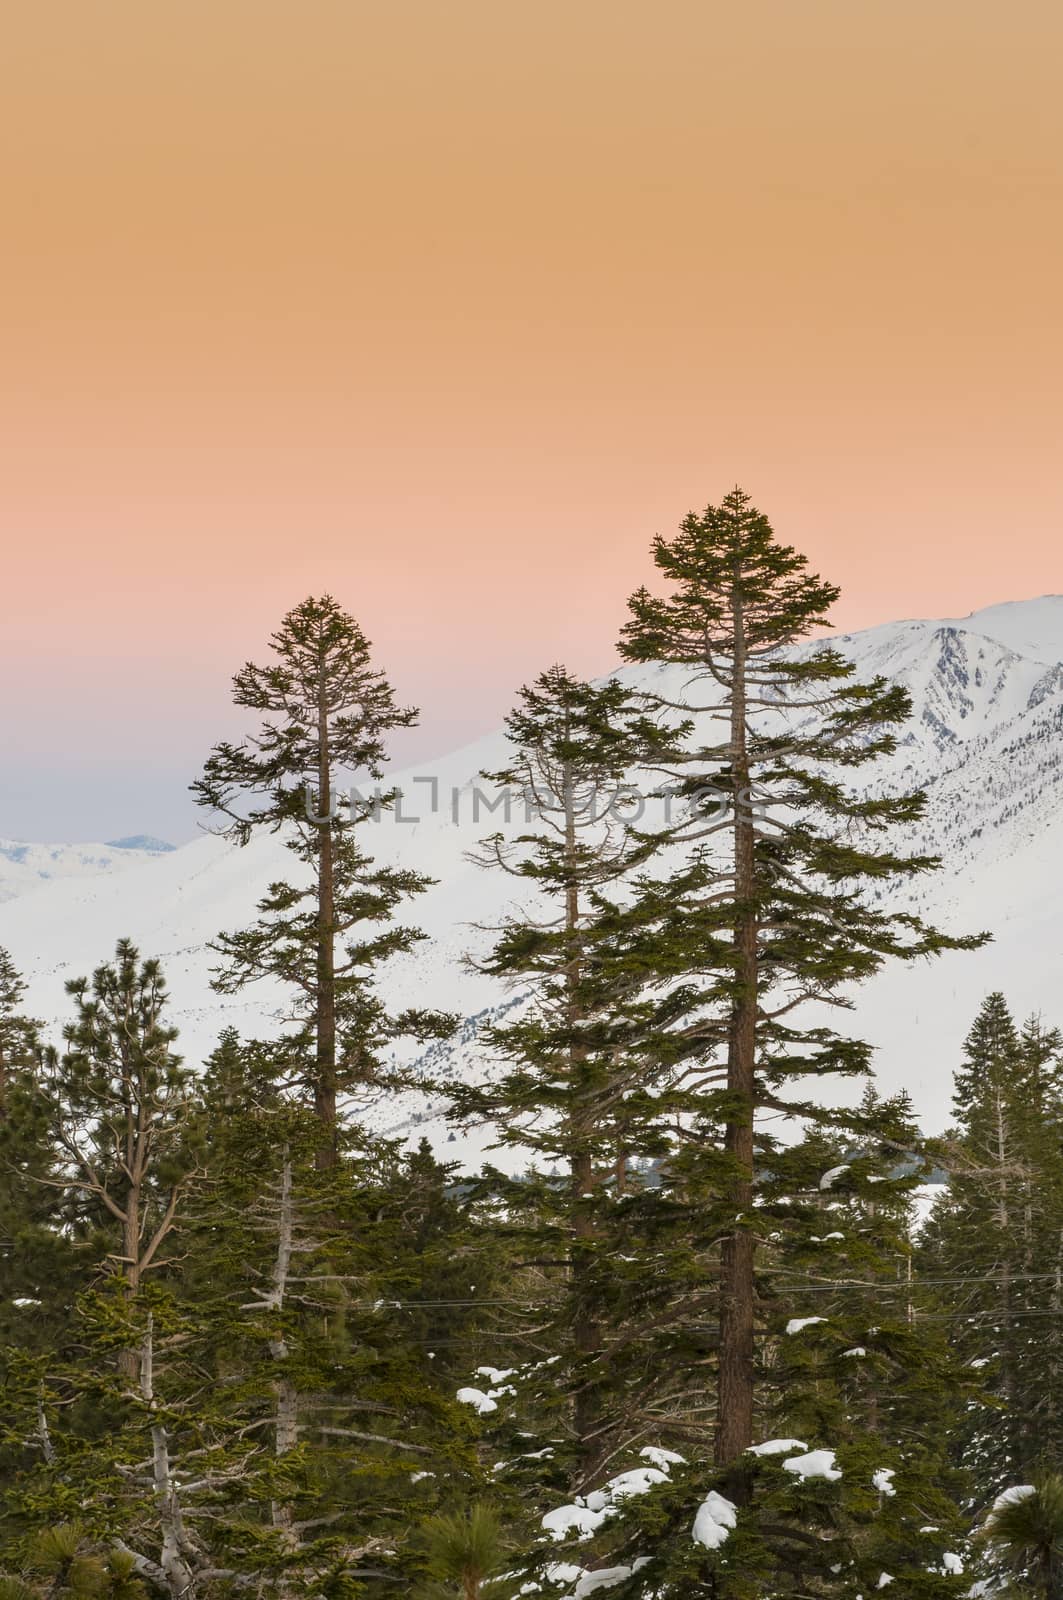 Sunset with pine trees and snow-capped mountains by Njean